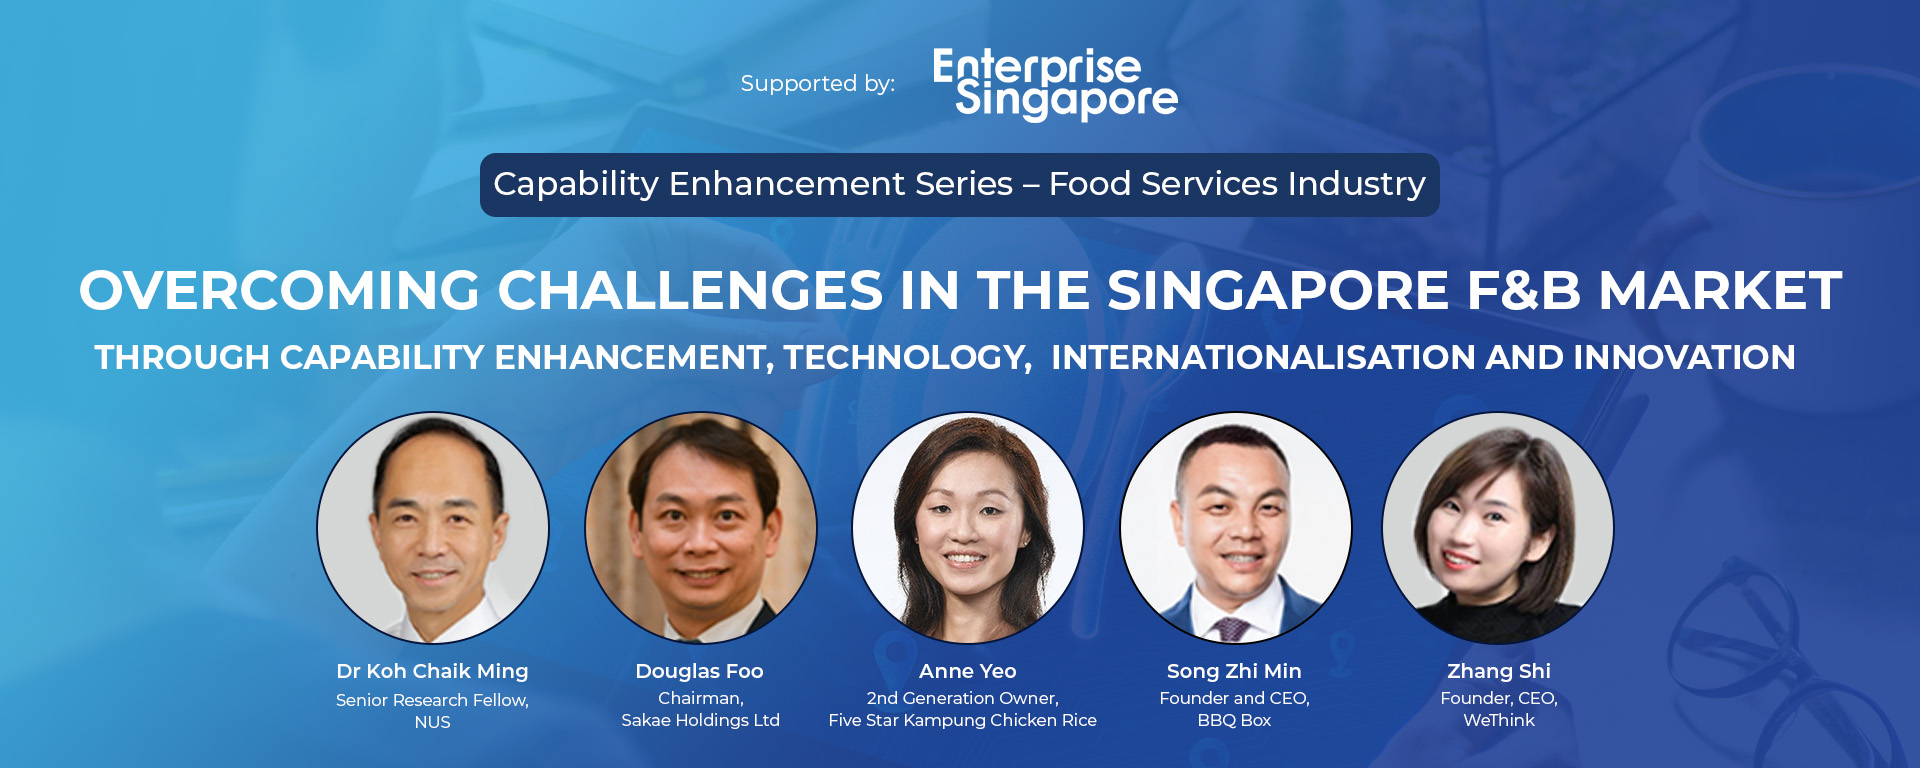 Overcoming Challenges in the F&B Market